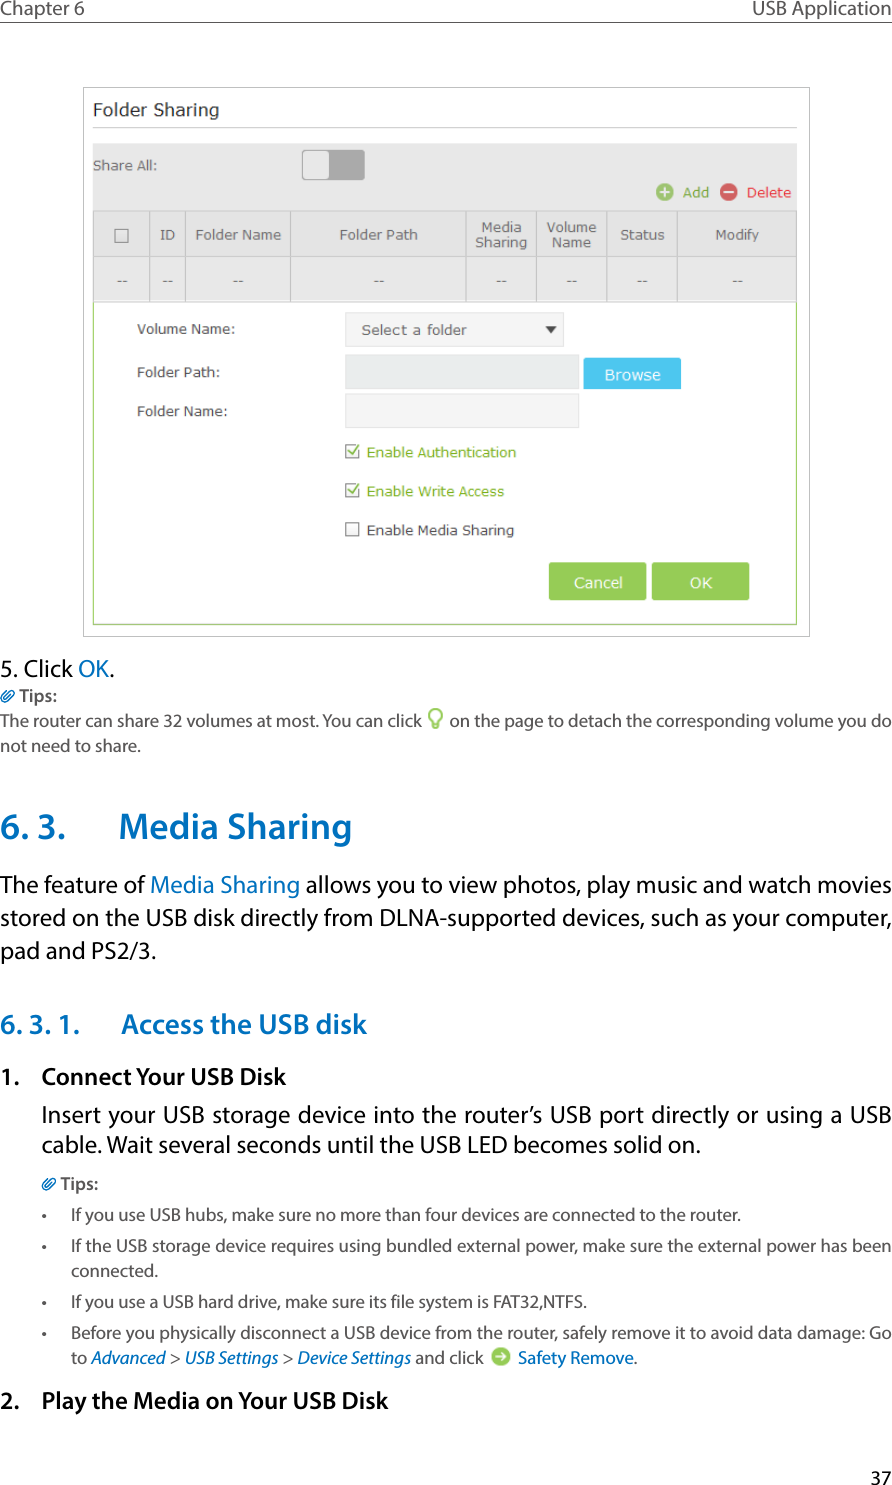 37Chapter 6 USB Application5. Click OK.Tips:The router can share 32 volumes at most. You can click   on the page to detach the corresponding volume you do not need to share.6. 3.  Media SharingThe feature of Media Sharing allows you to view photos, play music and watch movies stored on the USB disk directly from DLNA-supported devices, such as your computer, pad and PS2/3.6. 3. 1.  Access the USB disk1.  Connect Your USB DiskInsert your USB storage device into the router’s USB port directly or using a USB cable. Wait several seconds until the USB LED becomes solid on.Tips:•  If you use USB hubs, make sure no more than four devices are connected to the router.•  If the USB storage device requires using bundled external power, make sure the external power has been connected.•  If you use a USB hard drive, make sure its file system is FAT32,NTFS.•  Before you physically disconnect a USB device from the router, safely remove it to avoid data damage: Go to Advanced &gt; USB Settings &gt; Device Settings and click   Safety Remove.2.  Play the Media on Your USB Disk